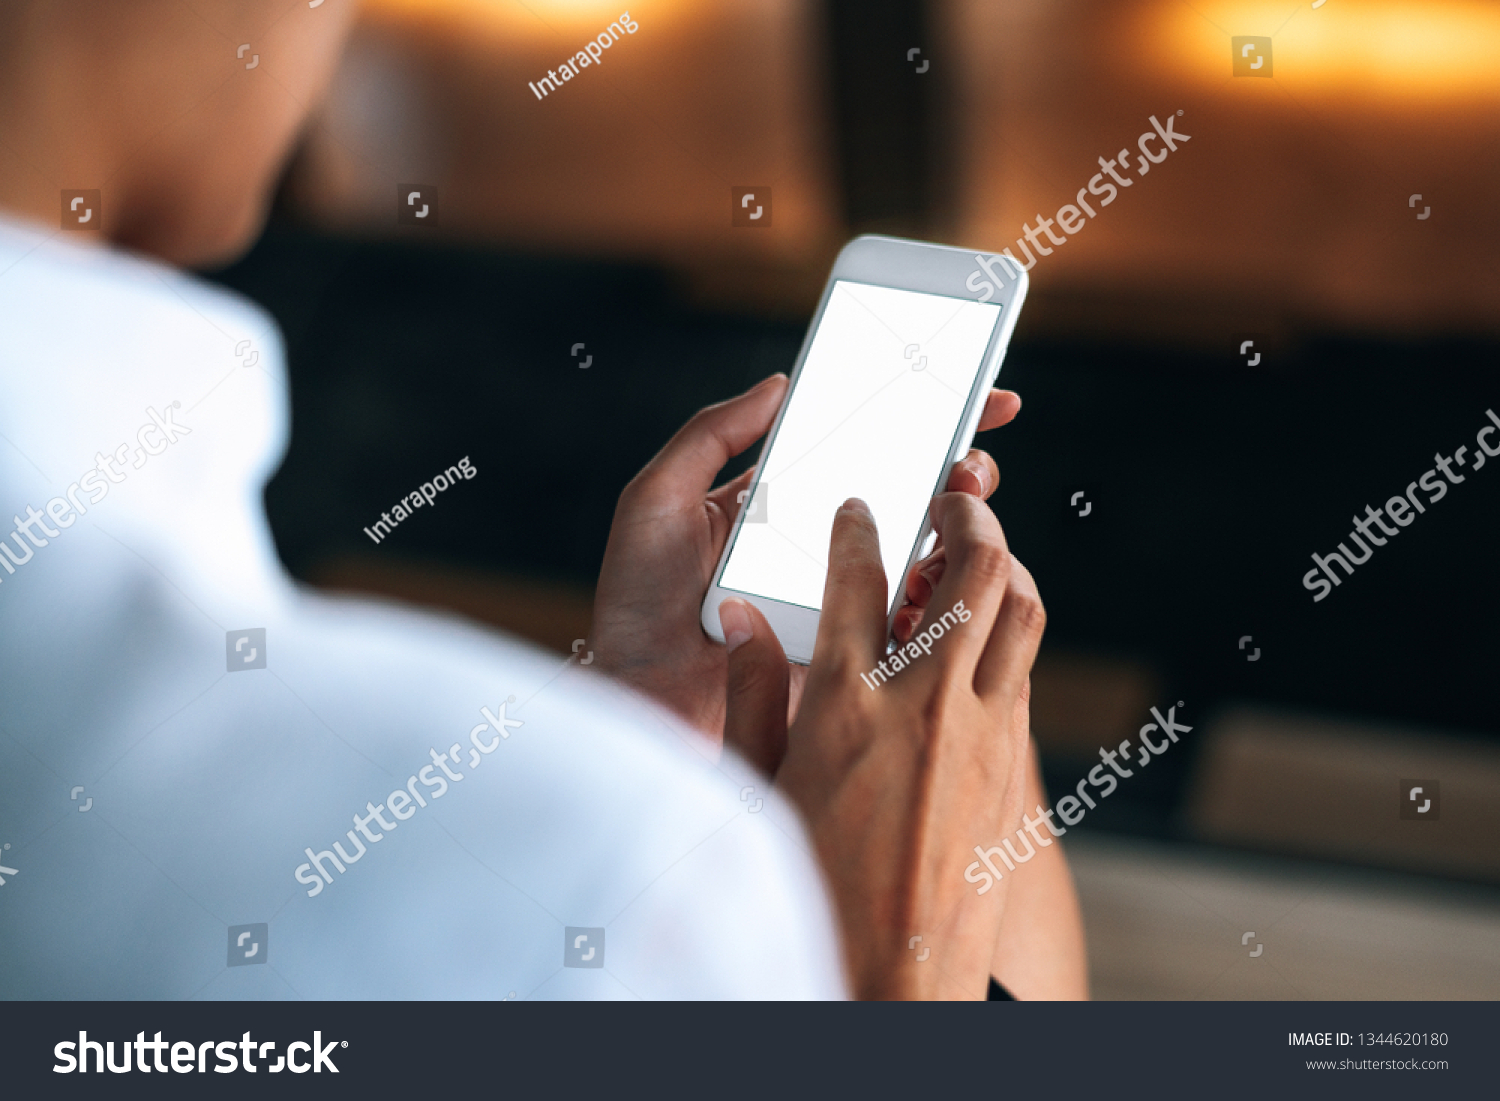 Woman using a smartphone read and text messages with blank space screen display from behind view- woman office worker- digital and communication concept #1344620180